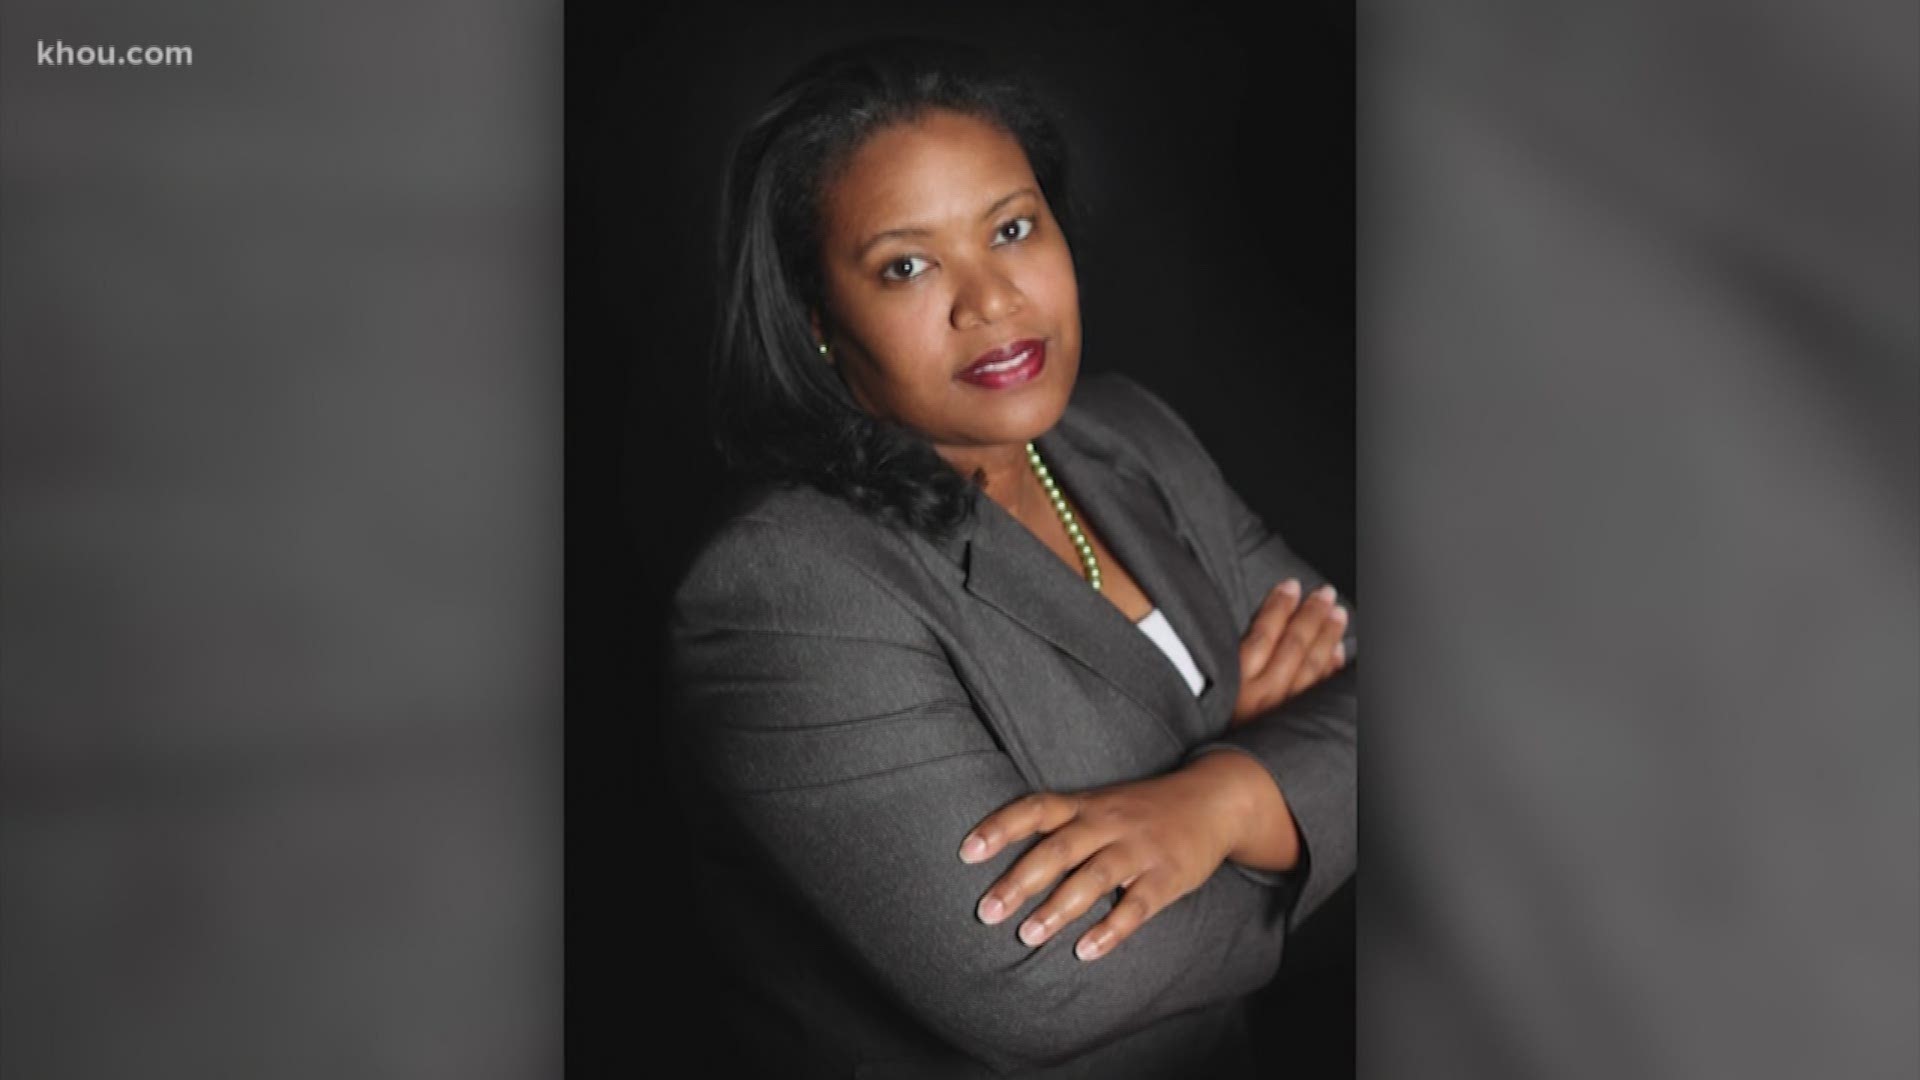 Missouri City hit a milestone Saturday with its newly-elected mayor. Yolanda Ford became the first black person and first woman elected to the position.